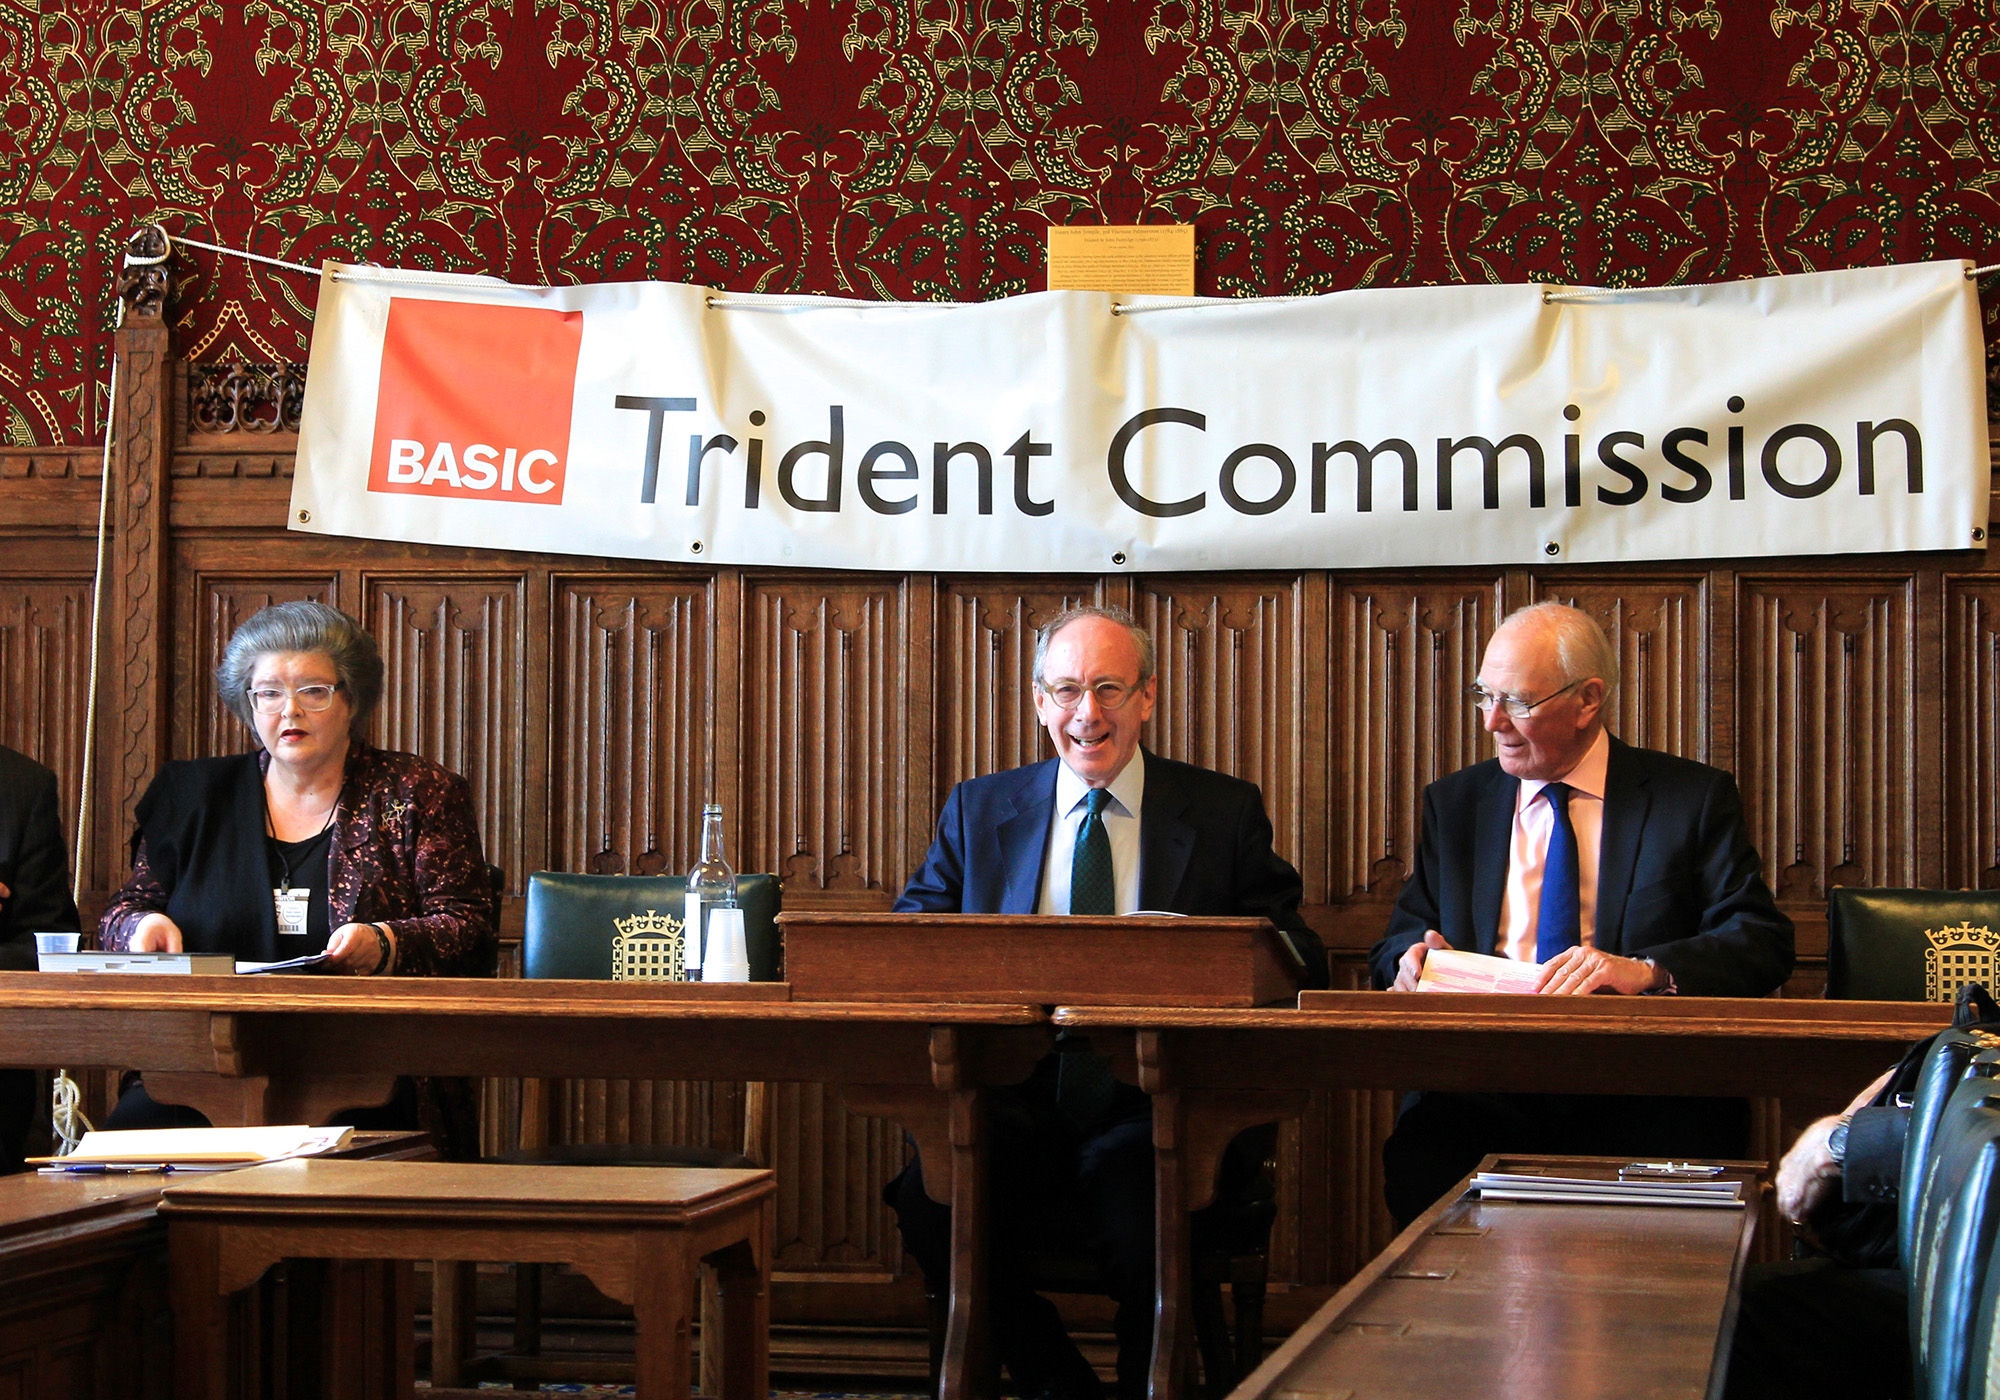 Trident Commission BASIC cropped